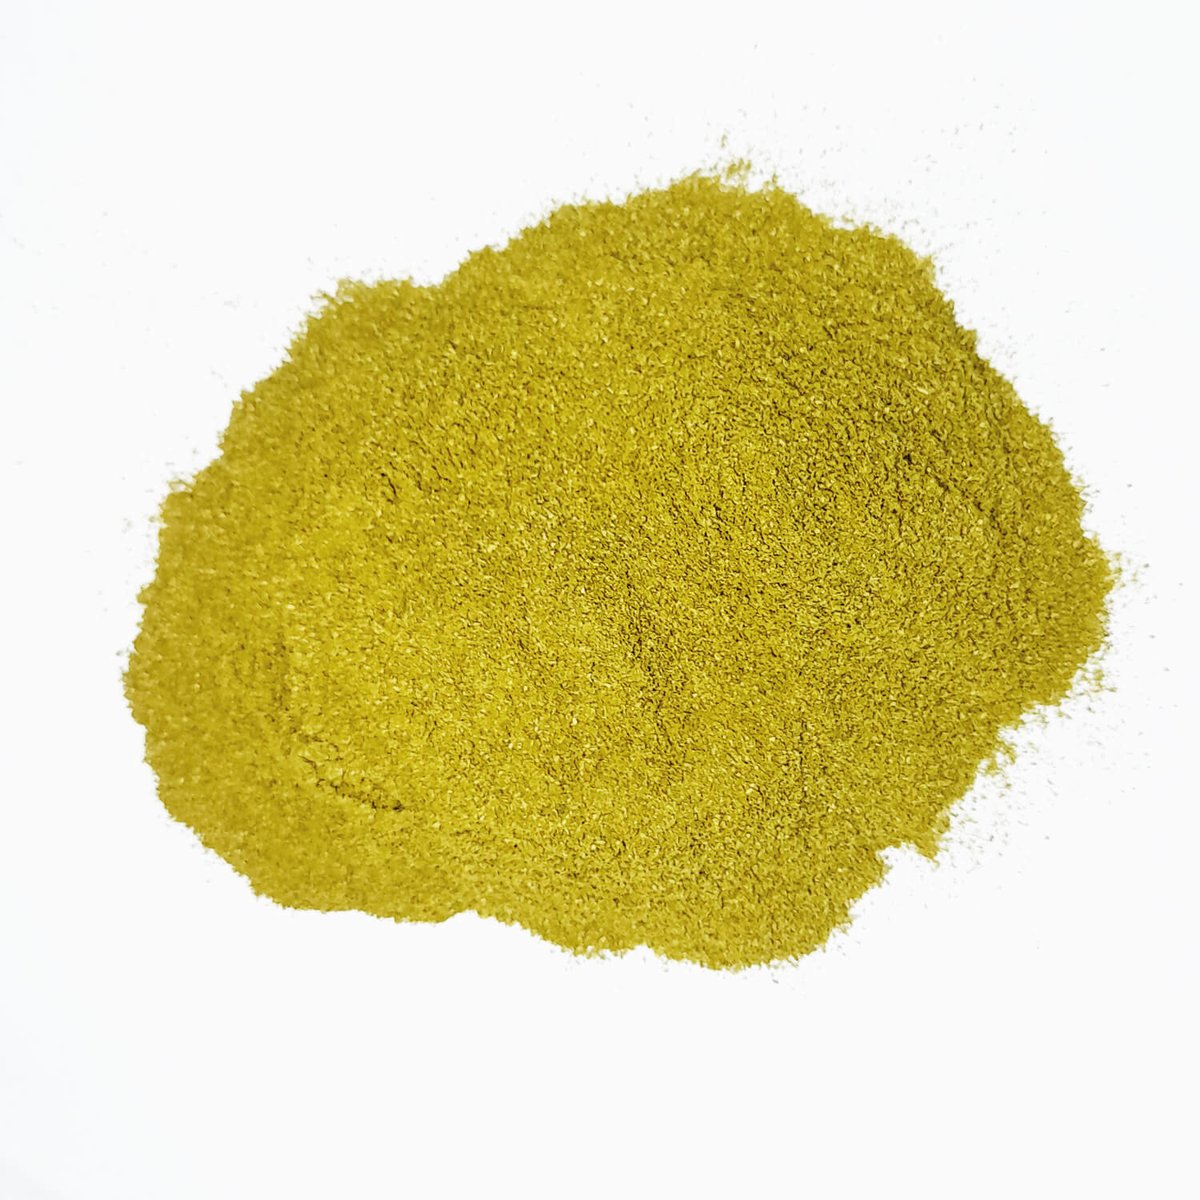 Wholesale Passion Fruit (Passiflora Edulis) Dried Leaf Cut / Dried Leaf Powder
realceylon.com/product/wholes…
#wholesale #bulk #dehydrated #Herbal #herb #herbs #herbalism #buy #sell #resell #product #food #organic #natural #Ayurveda #Health #medicine #ayurvedicmedicine #herbalproducts